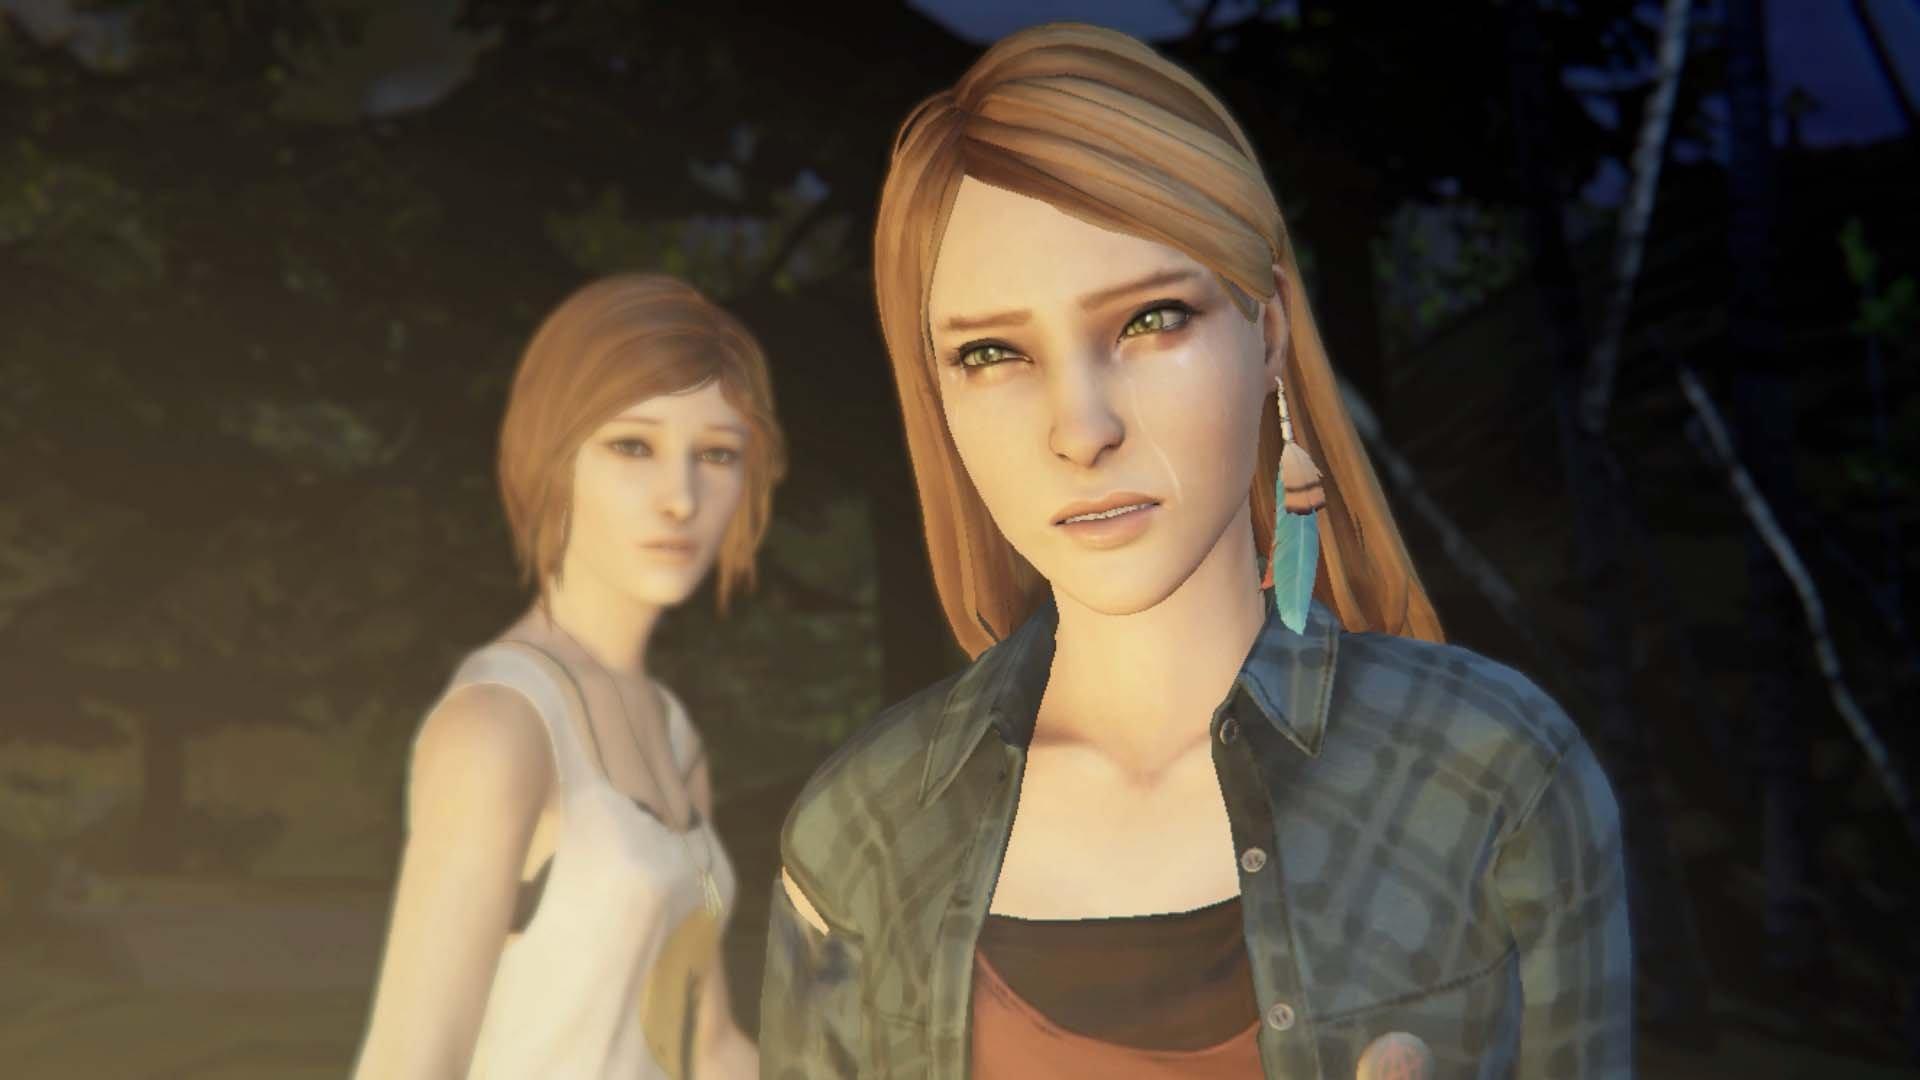 Life Is Strange: Remastered Collection Announced - Game Informer